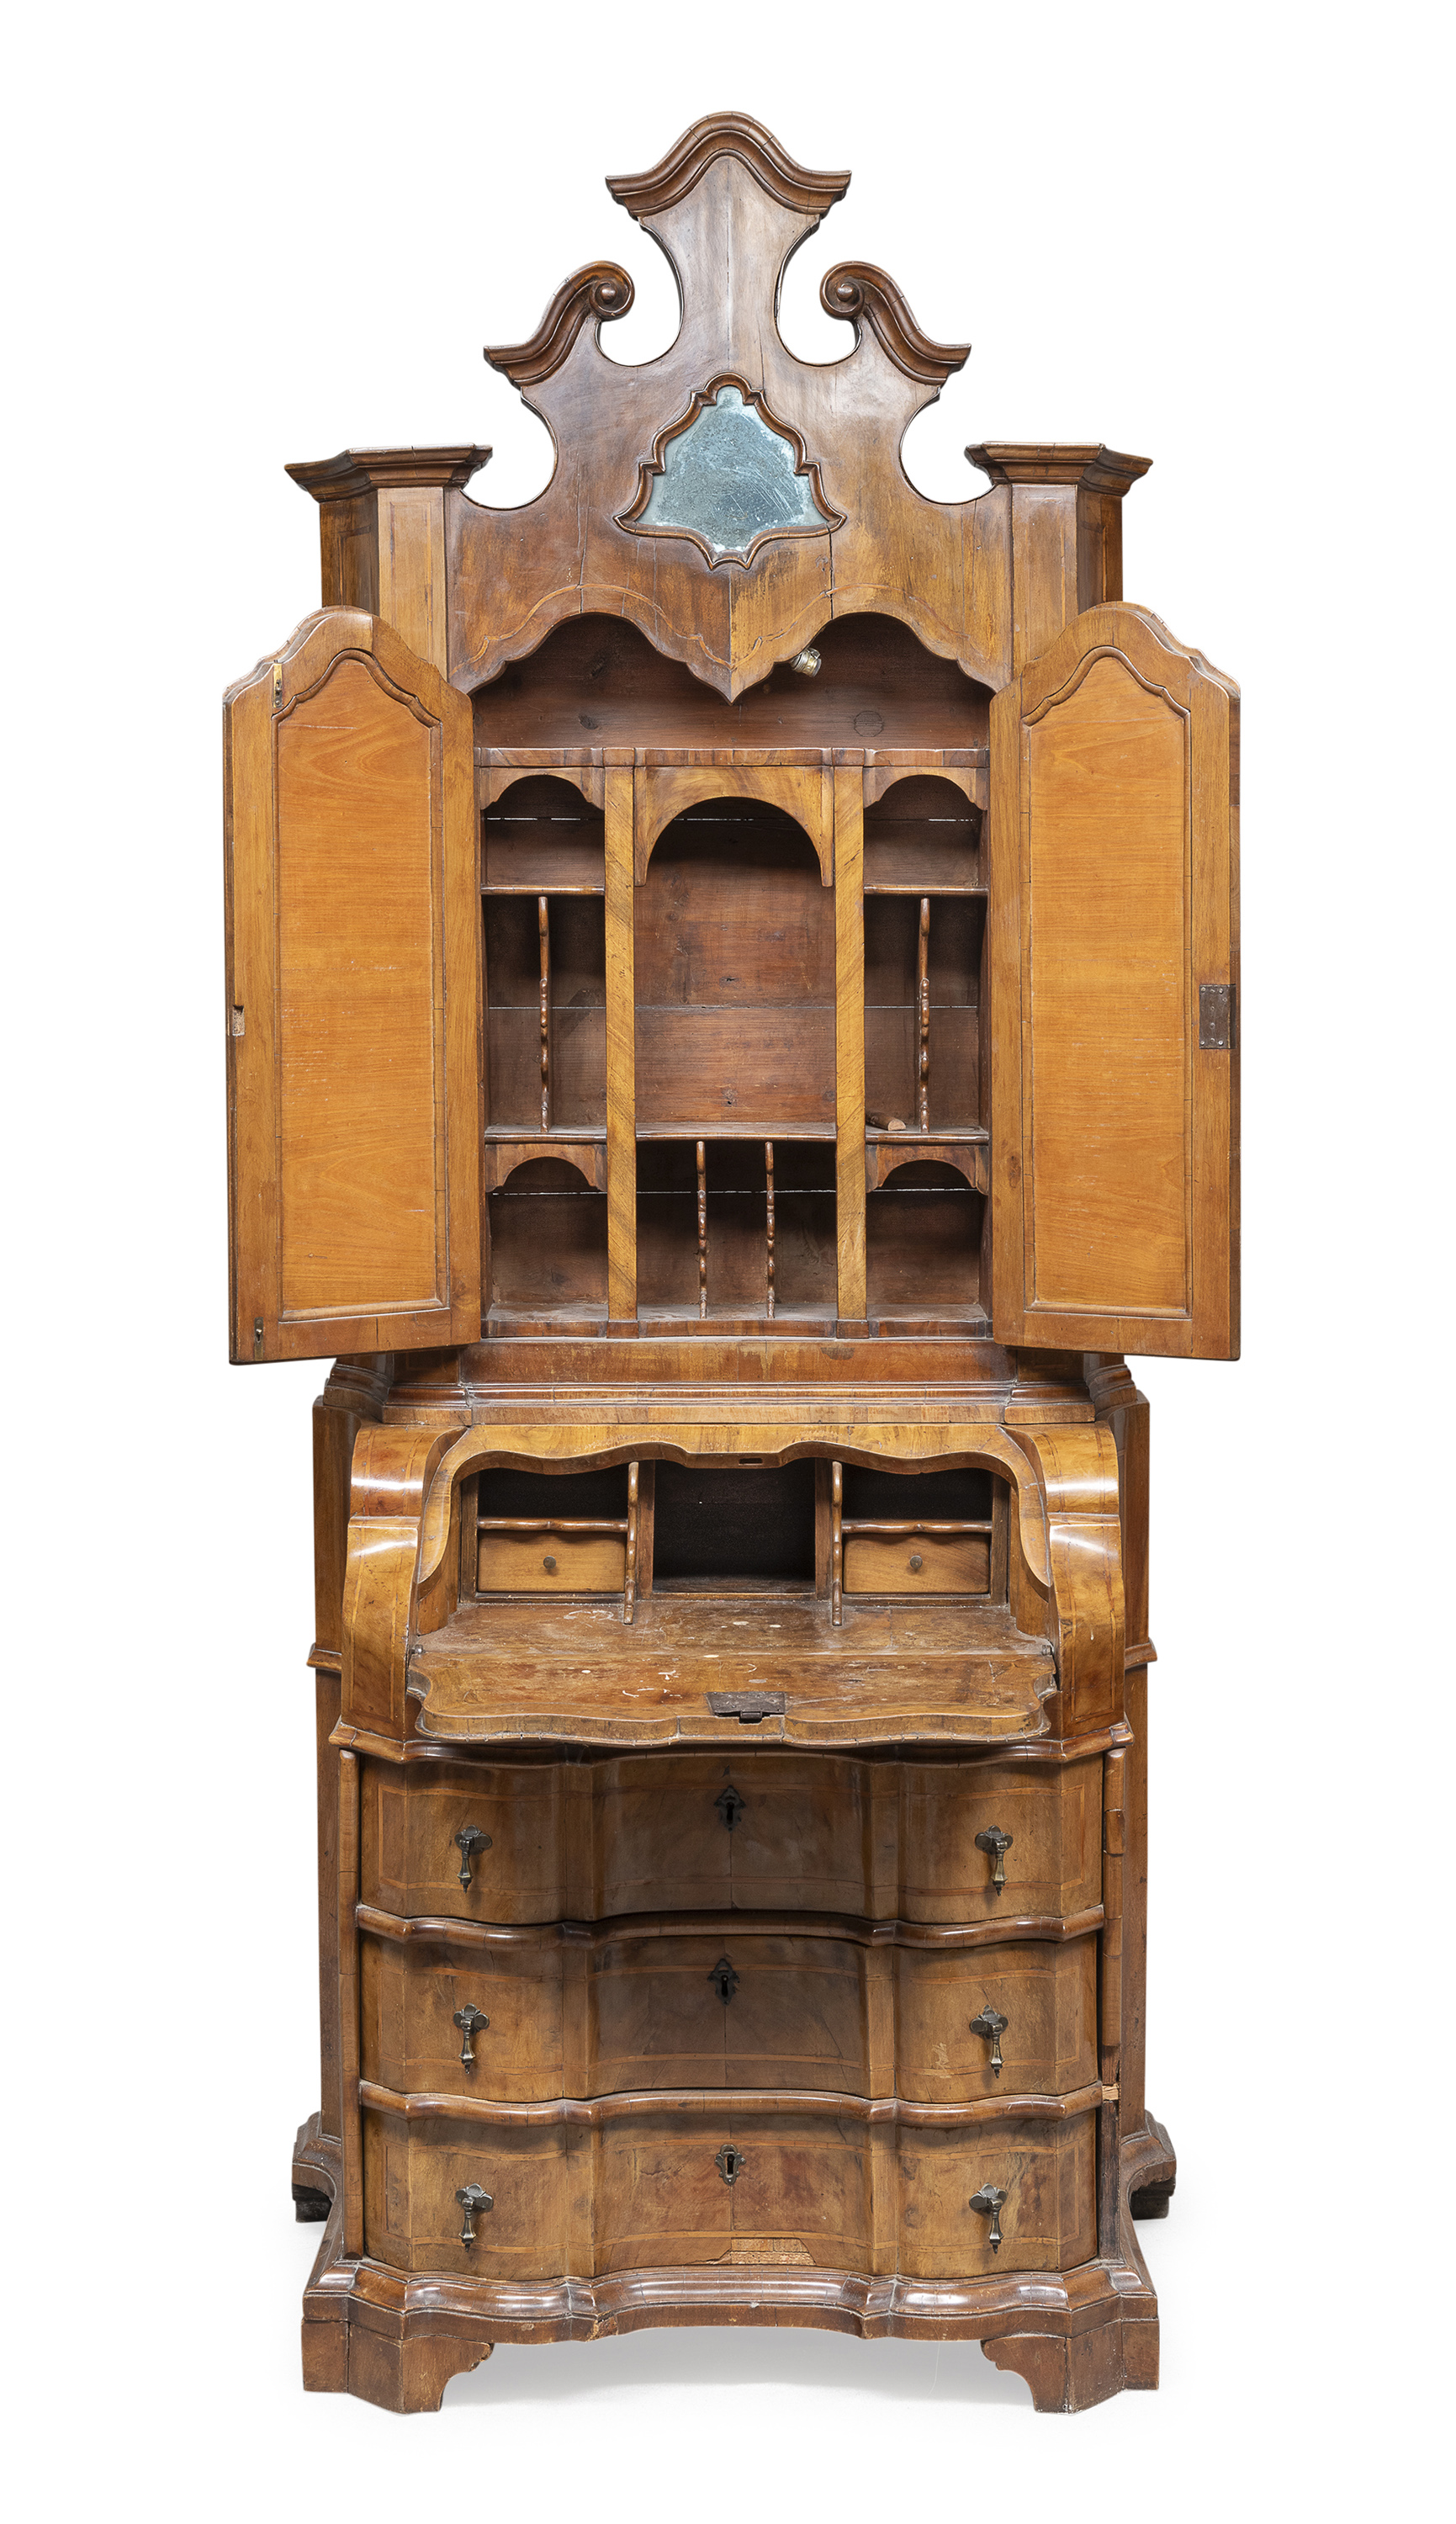 SMALL WALNUT TRUMEAU VERONA END OF THE 18TH CENTURY - Image 2 of 2